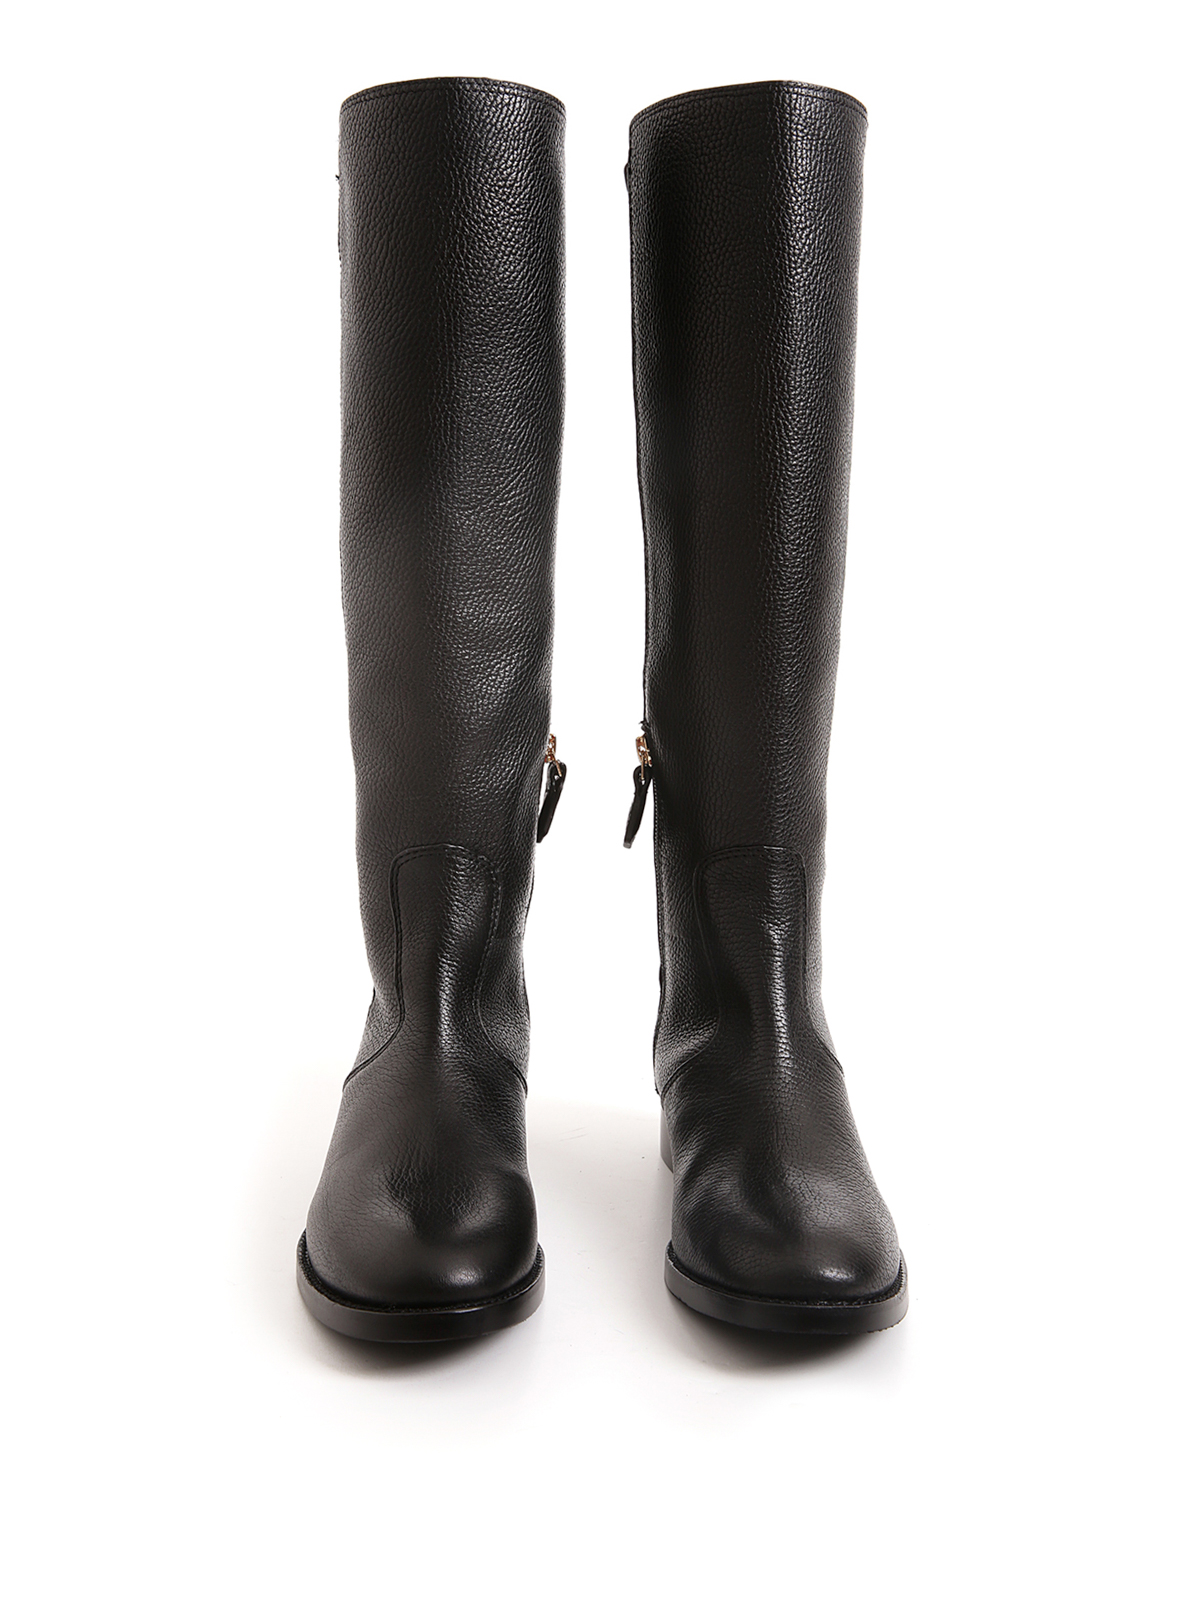 Boots Tory Burch - Selden riding boot - 32158628001 | Shop online at iKRIX